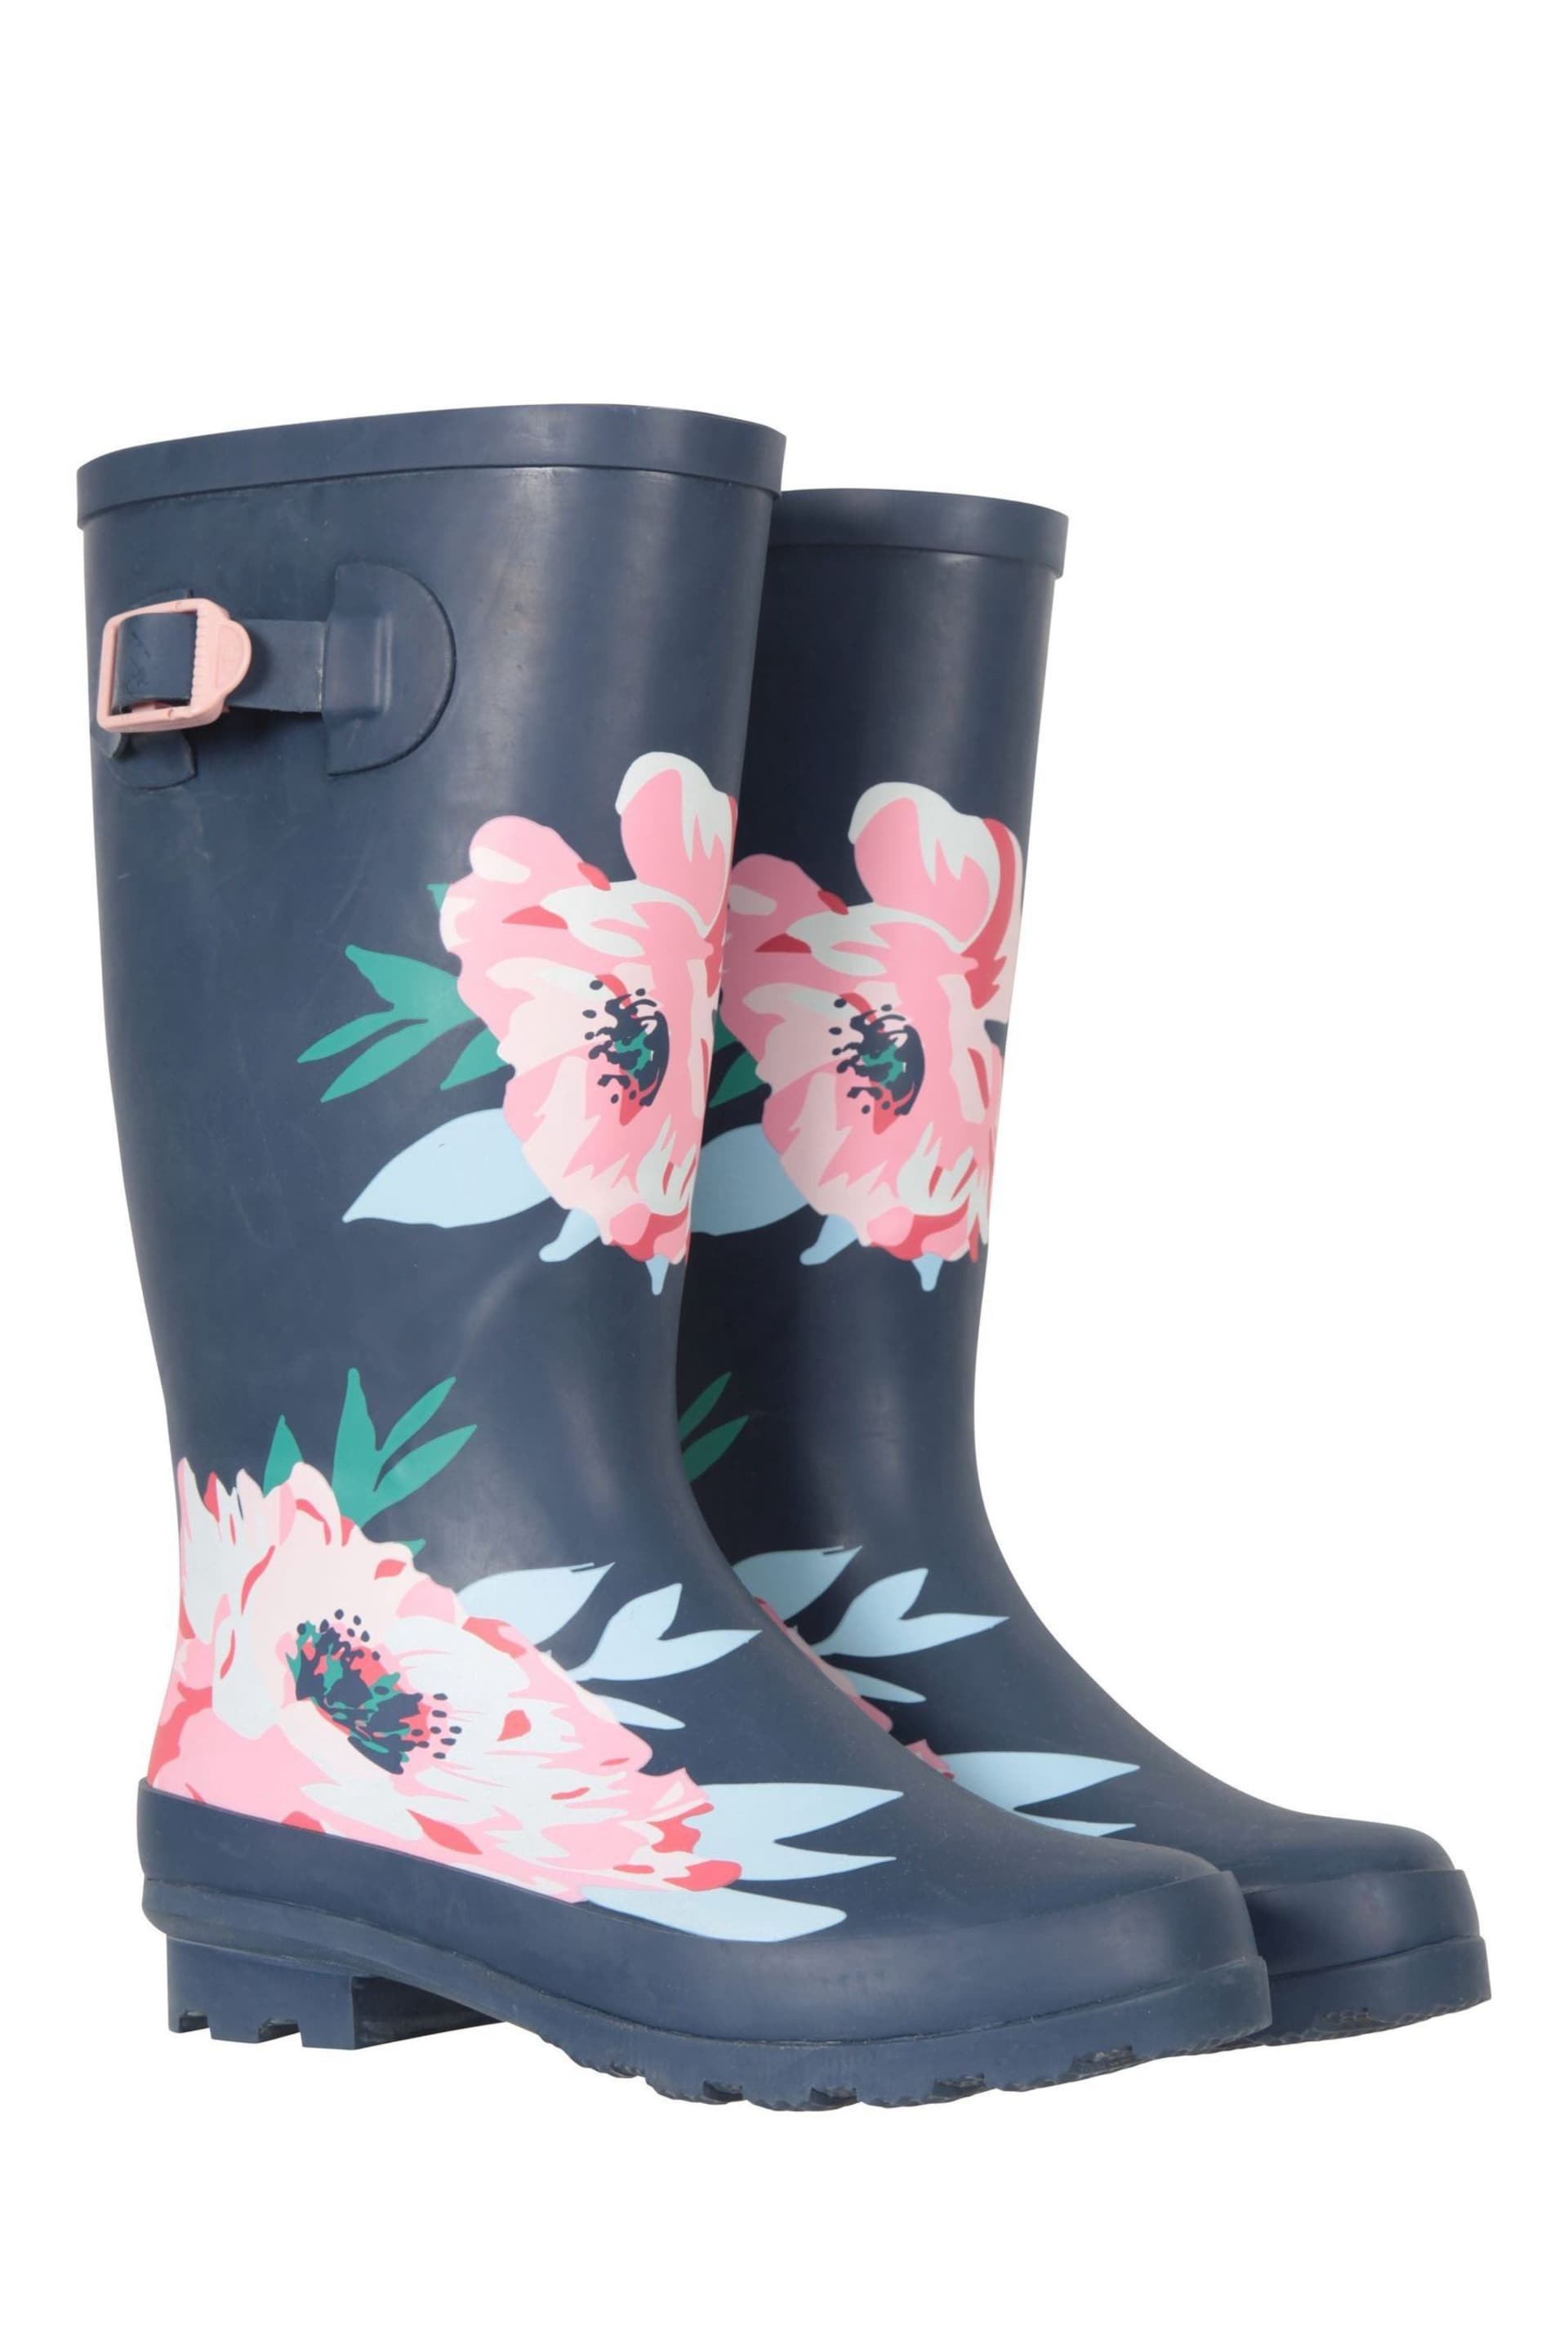 Mountain Warehouse Blue Womens Tall Buckle Printed Wellies - Image 3 of 6